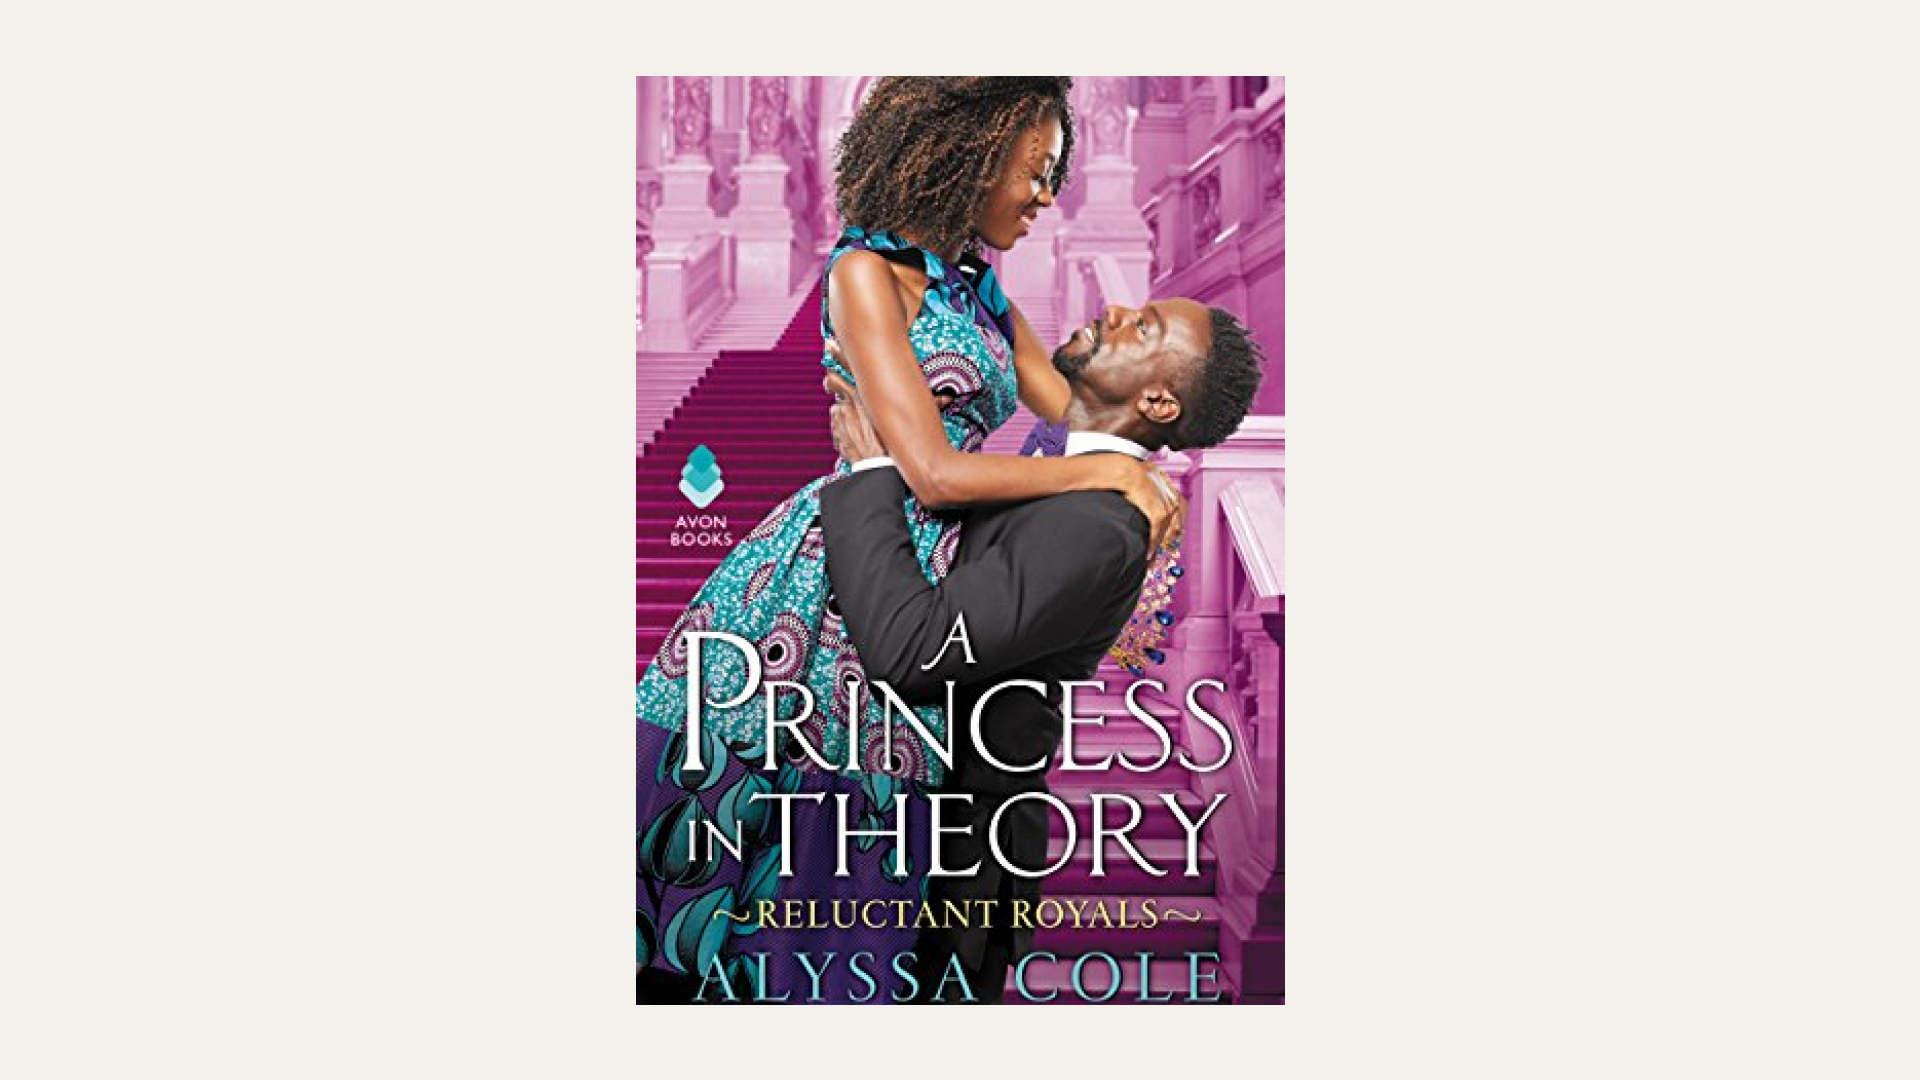 “A Princess in Theory” by Alyssa Cole